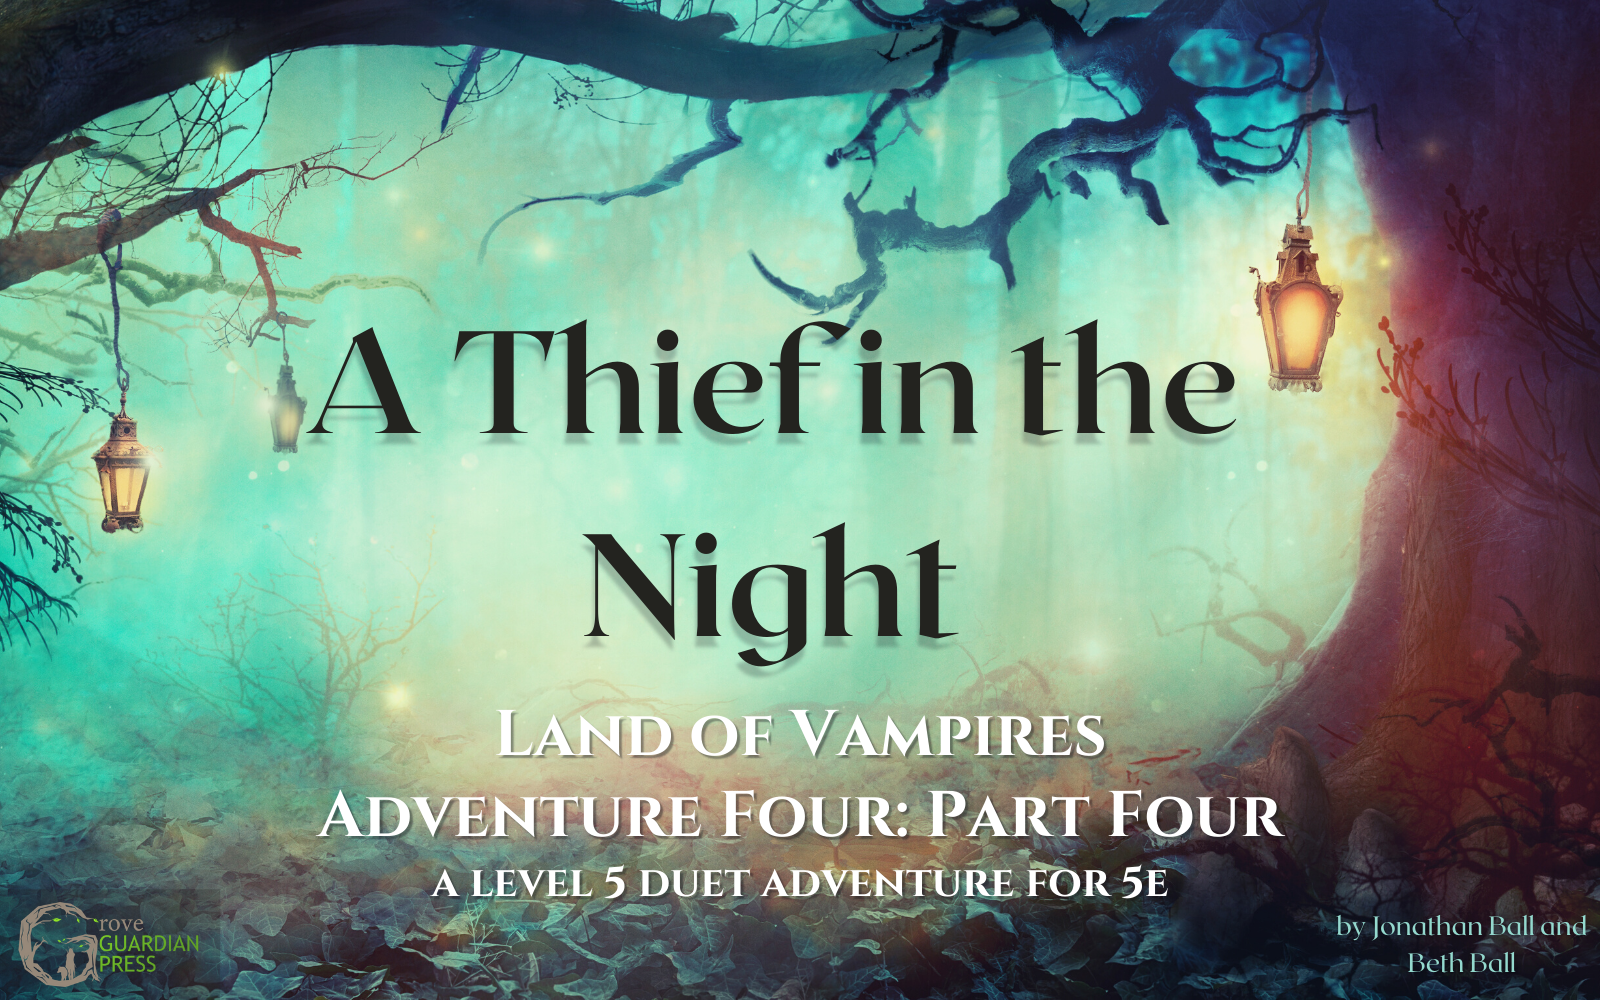 thief in the night meaning